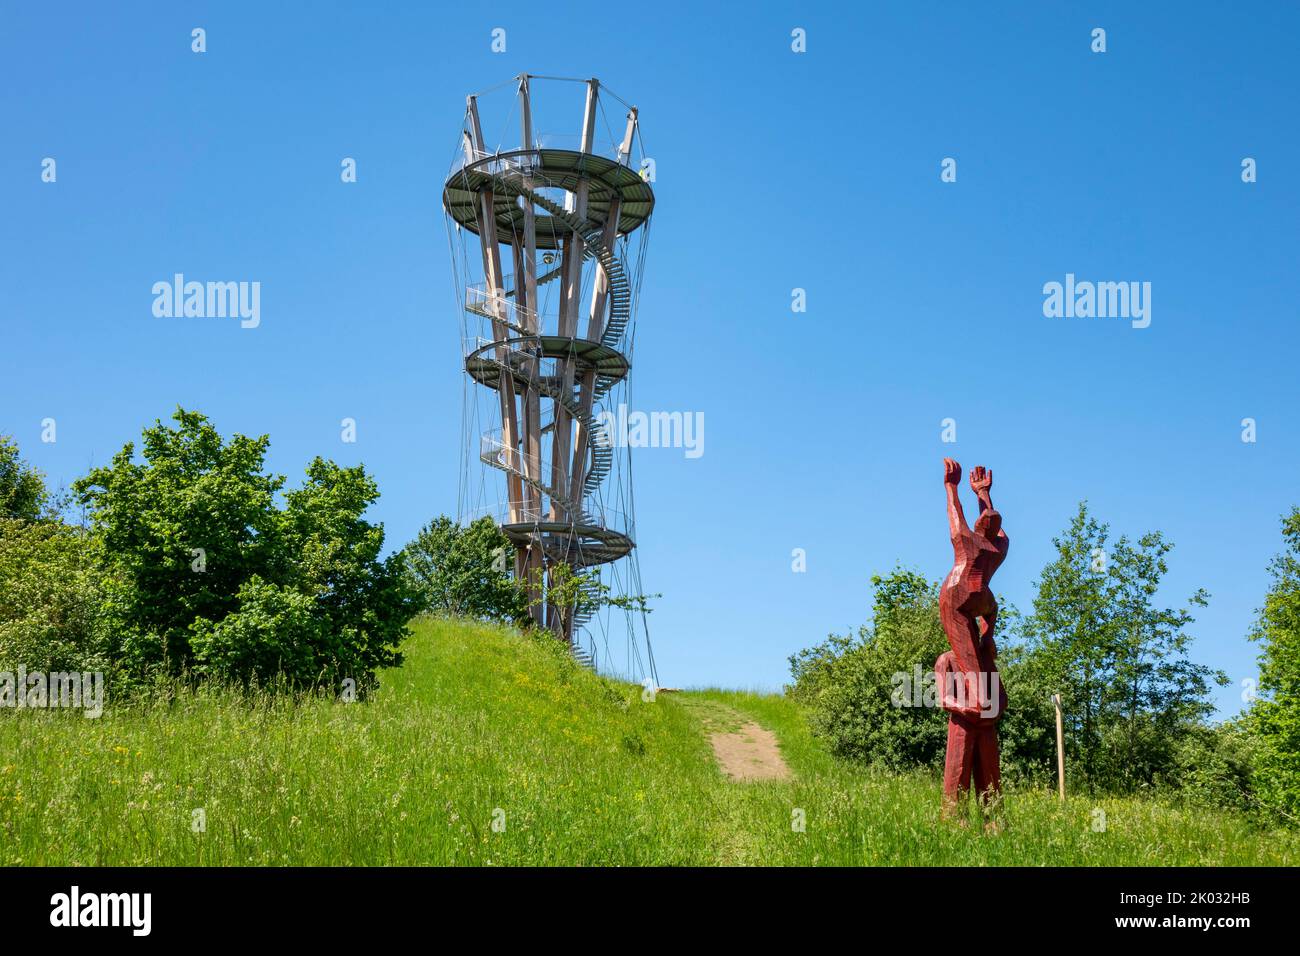 Germany, Baden-Württemberg, Herrenberg, if you climb the Schönbuchturm in Schönbuch near Herrenberg, which was opened in June 2018, up to the third platform, you will have a great 360° panoramic view. The tower stands on the 580 m high Stellberg in the Schönbch Nature Park. The wooden-steel construction is 35m high. The viewing platforms, which are located at 10m, 20m and 30m, can be reached via a spiral staircase with about 170 steps. Stock Photo